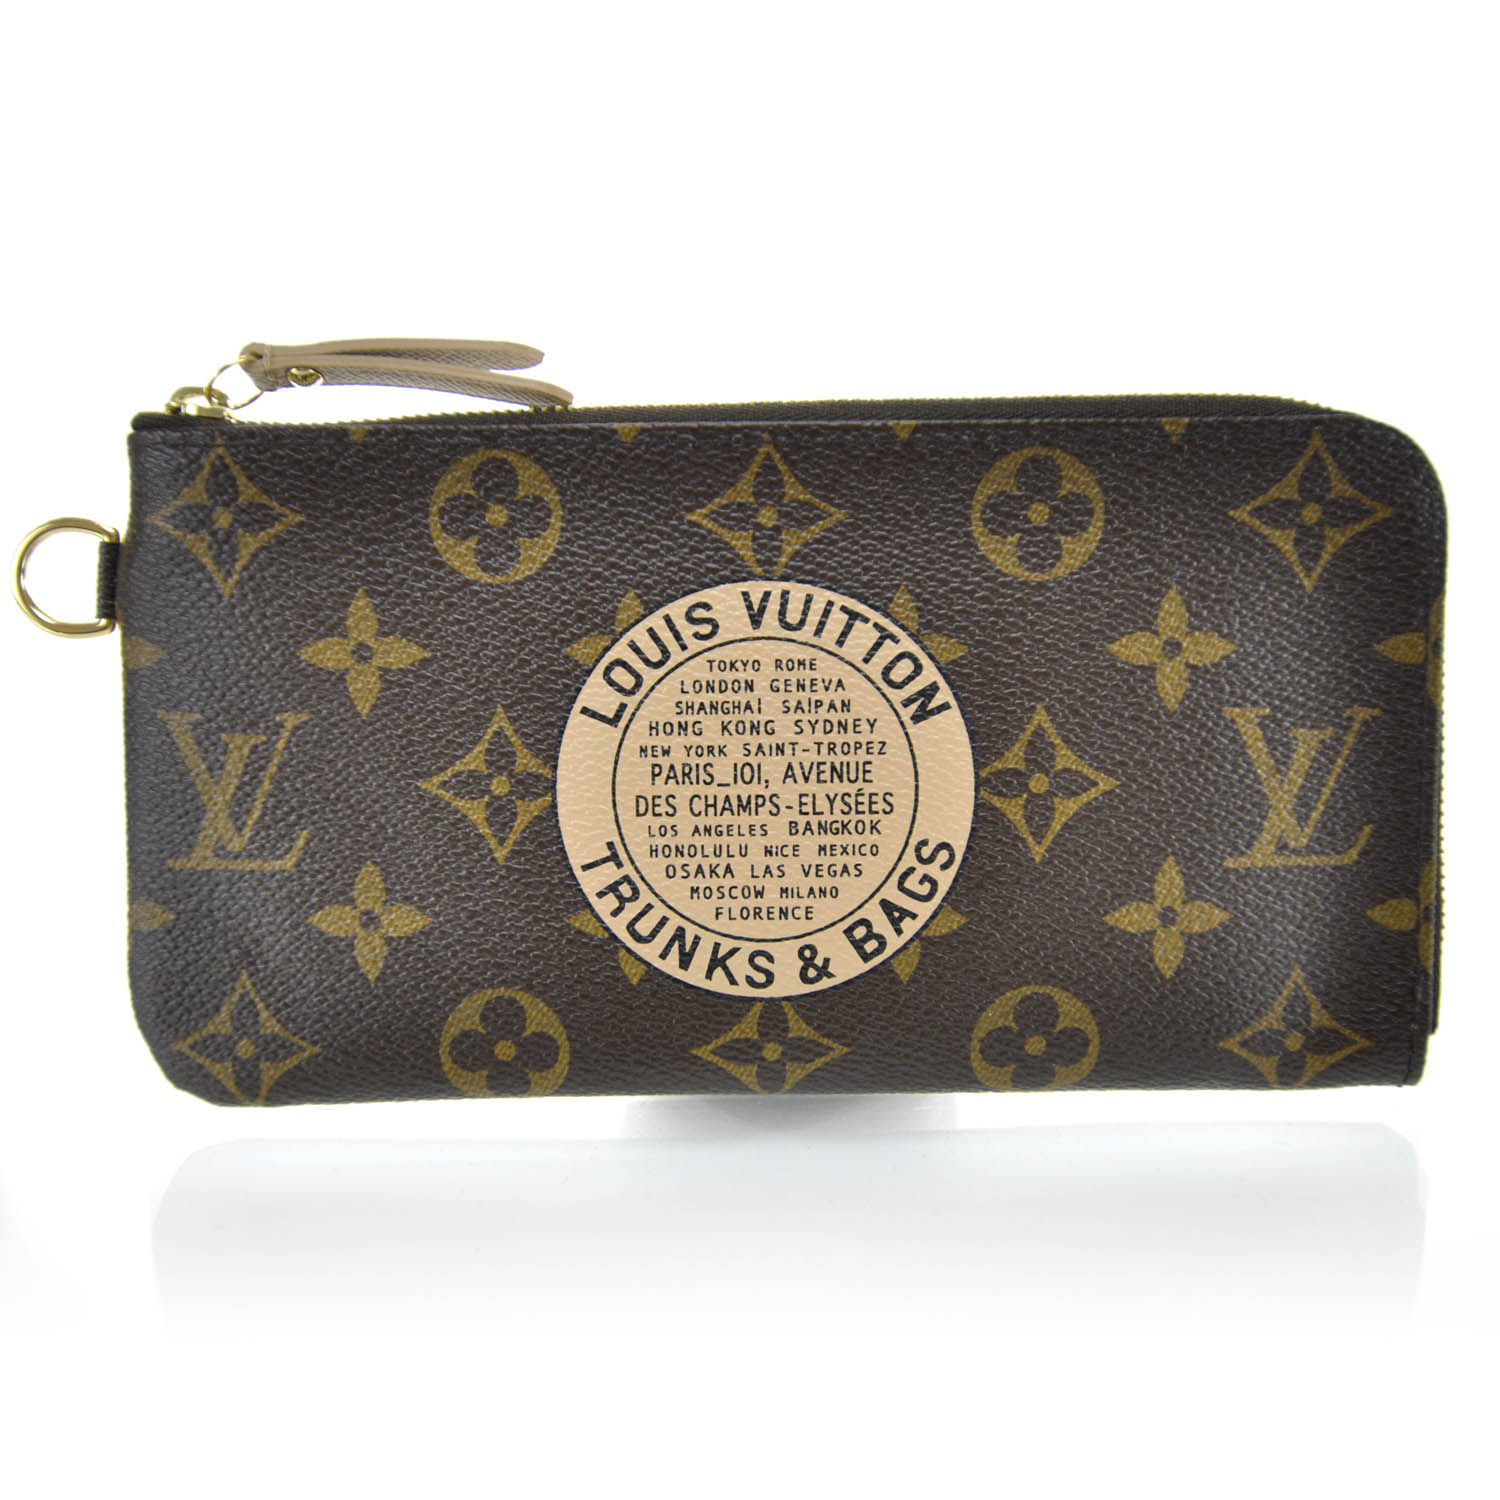 LOUIS VUITTON Complice Trunks and Bags Wallet Beige | 32382